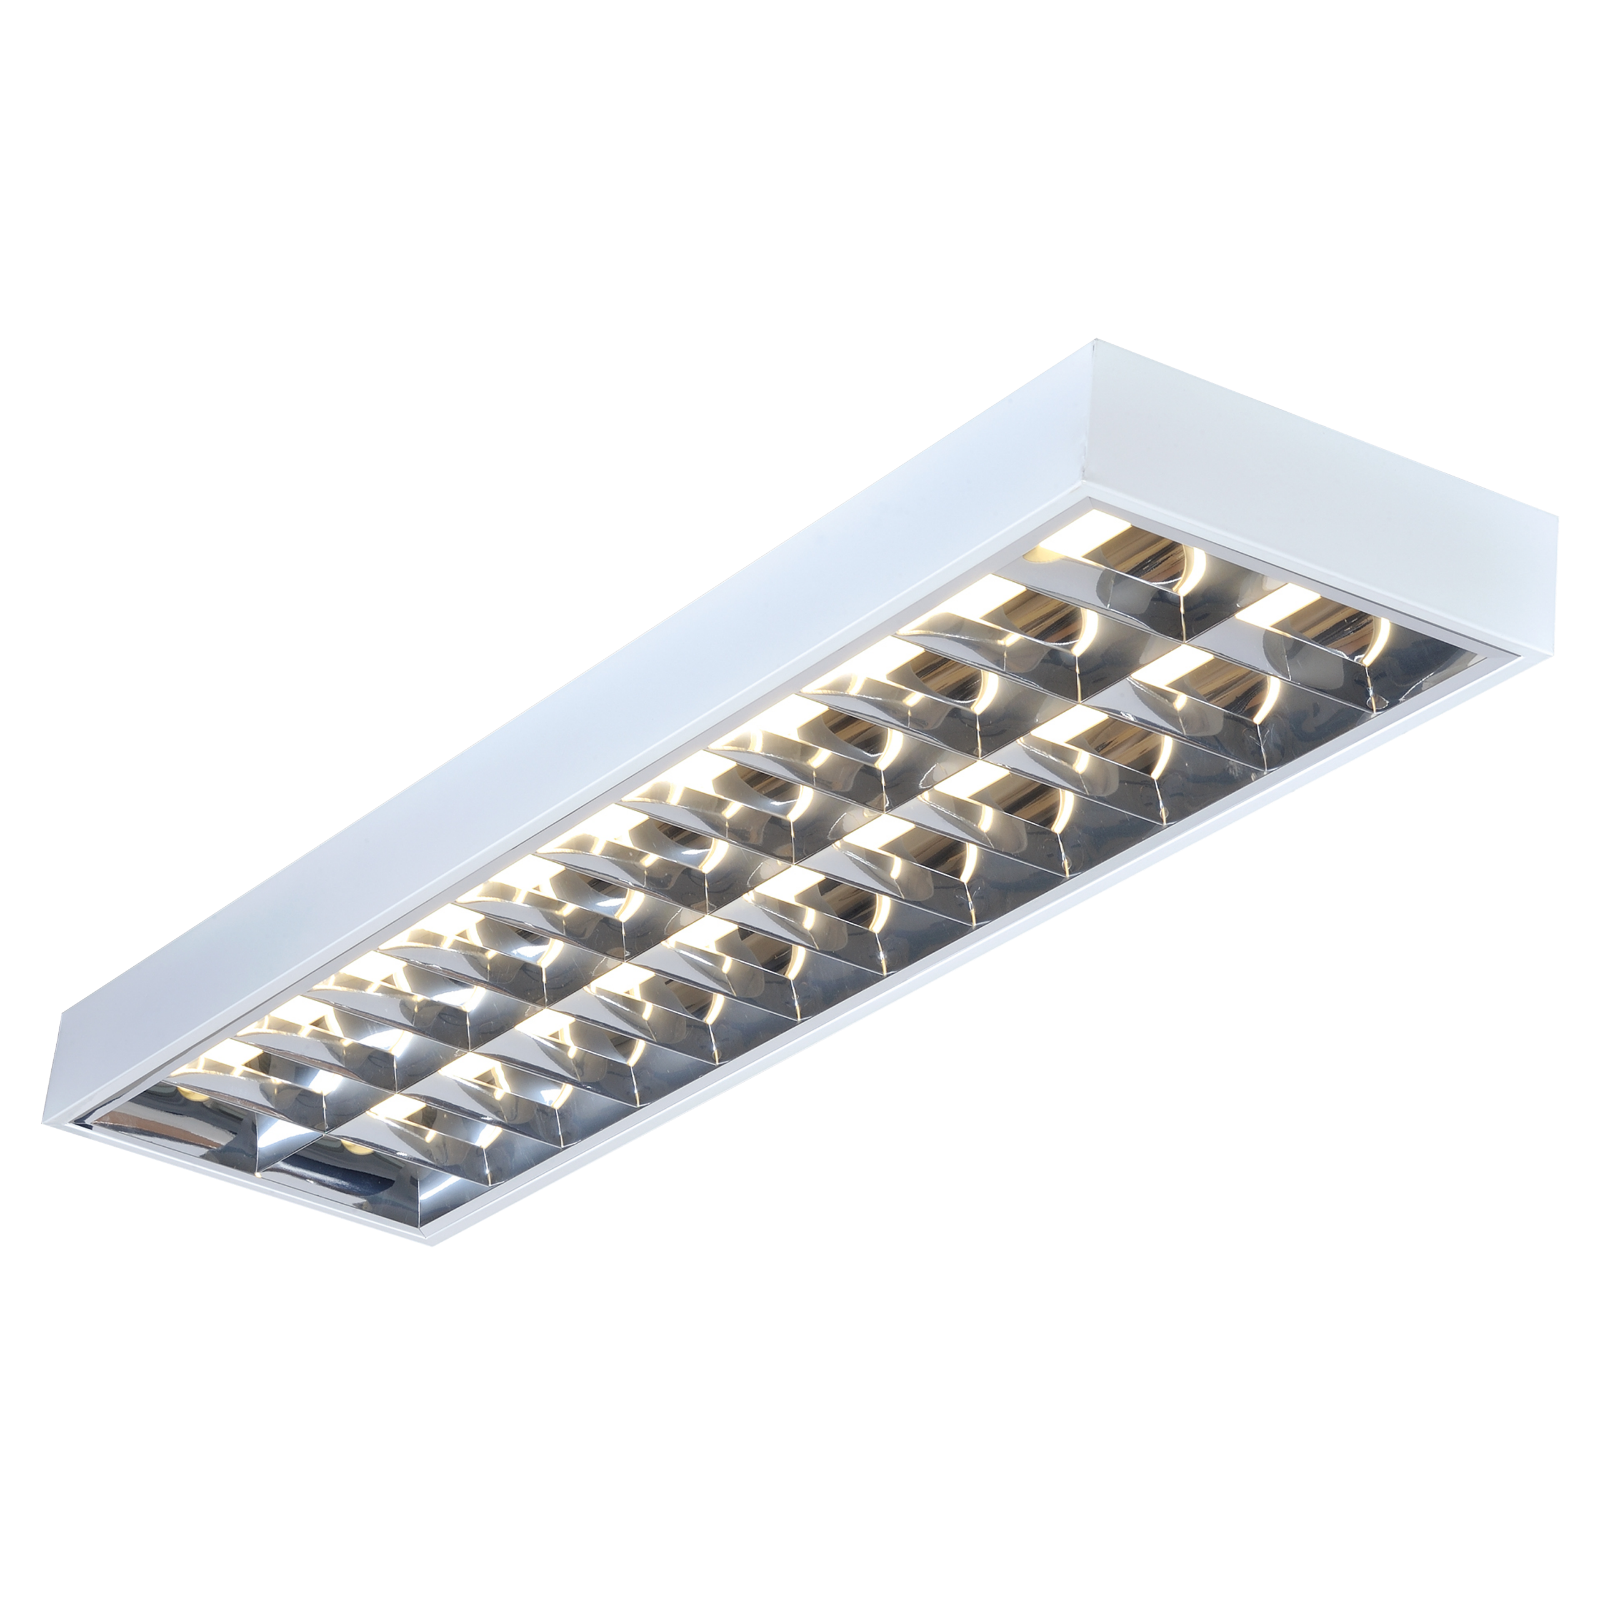 IP20 2x70W 6ft T8 Surface Mounted Emergency Fluorescent Fitting 1785x300x80mm - SURF270EMHF 